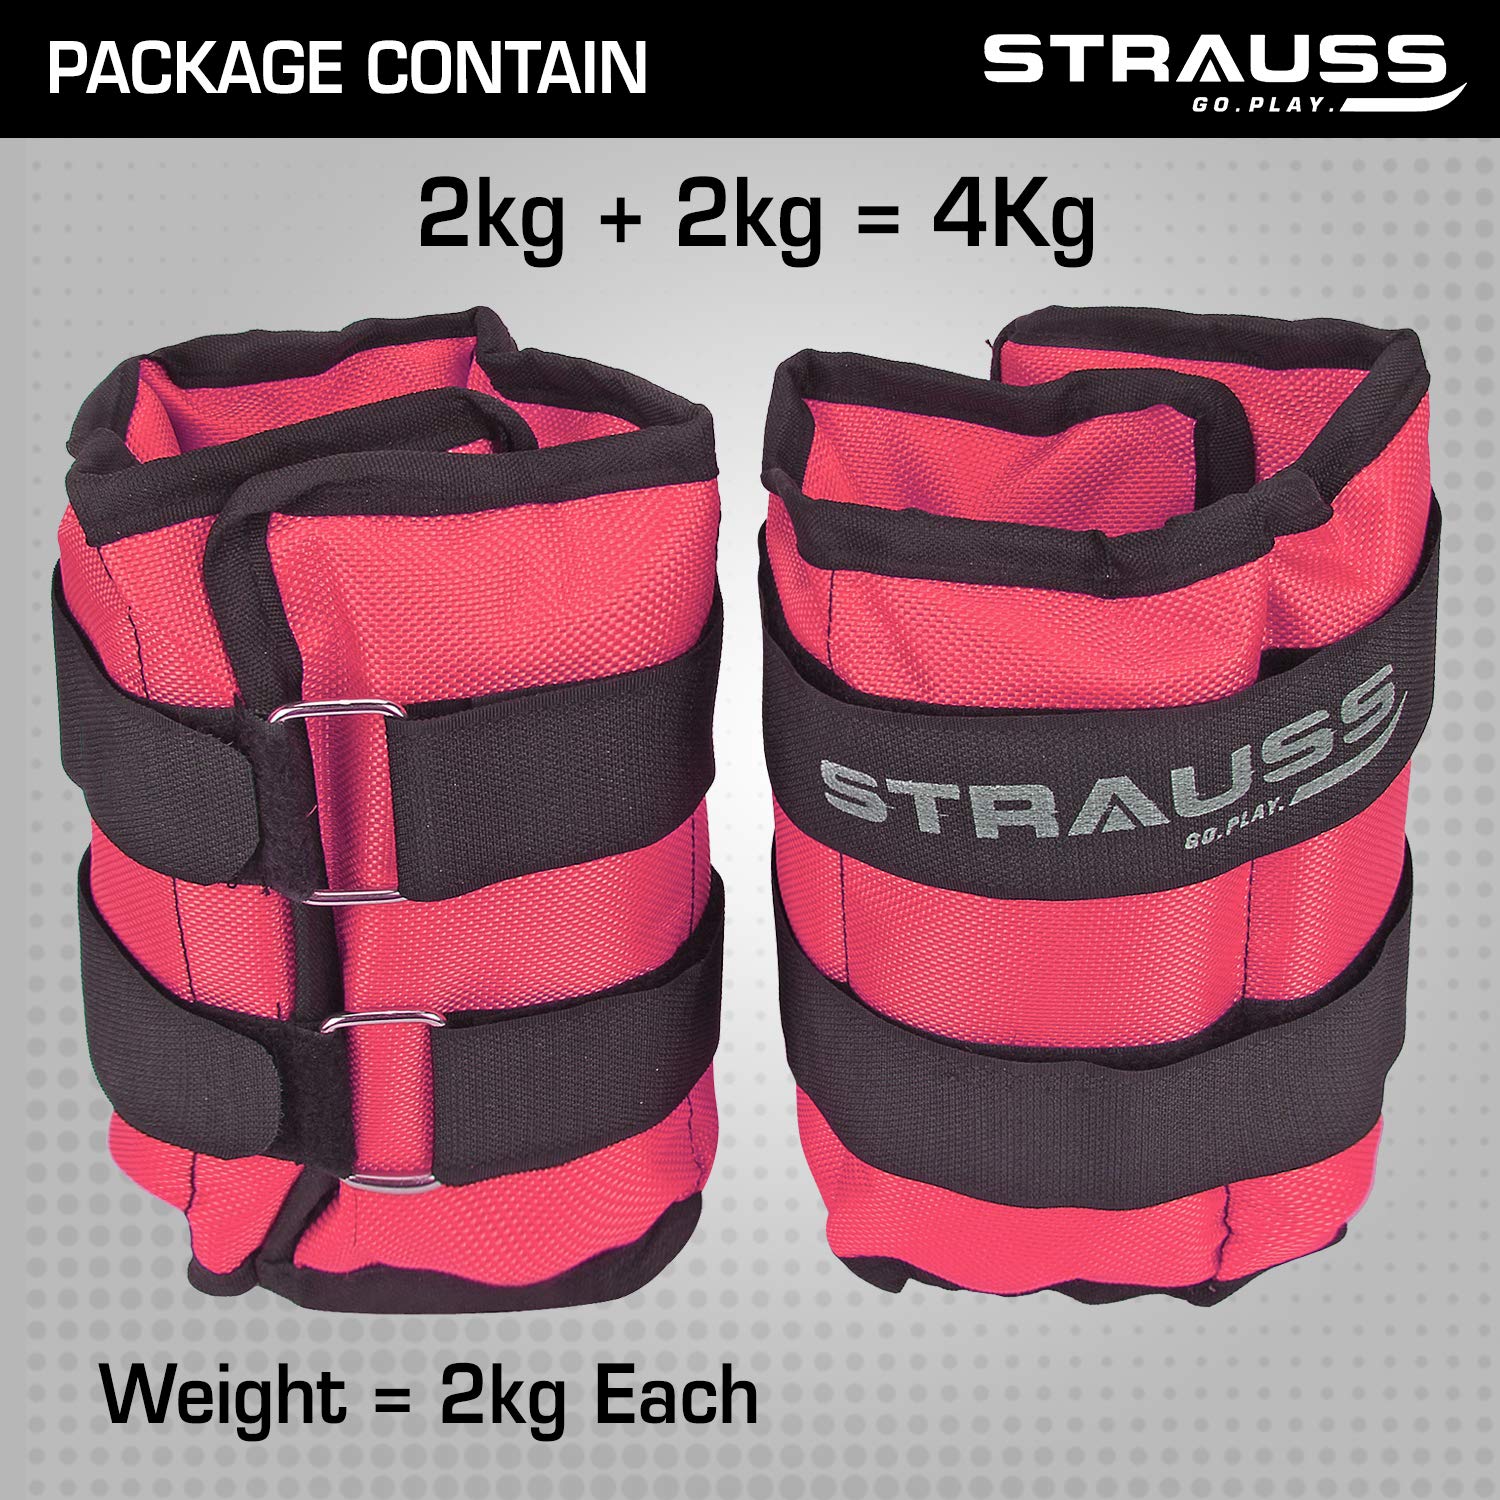 Strauss Adjustable Ankle/Wrist Weights 2 KG X 2 | Ideal for Walking, Running, Jogging, Cycling, Gym, Workout & Strength Training | Easy to Use on Ankle, Wrist, Leg, (Pink)